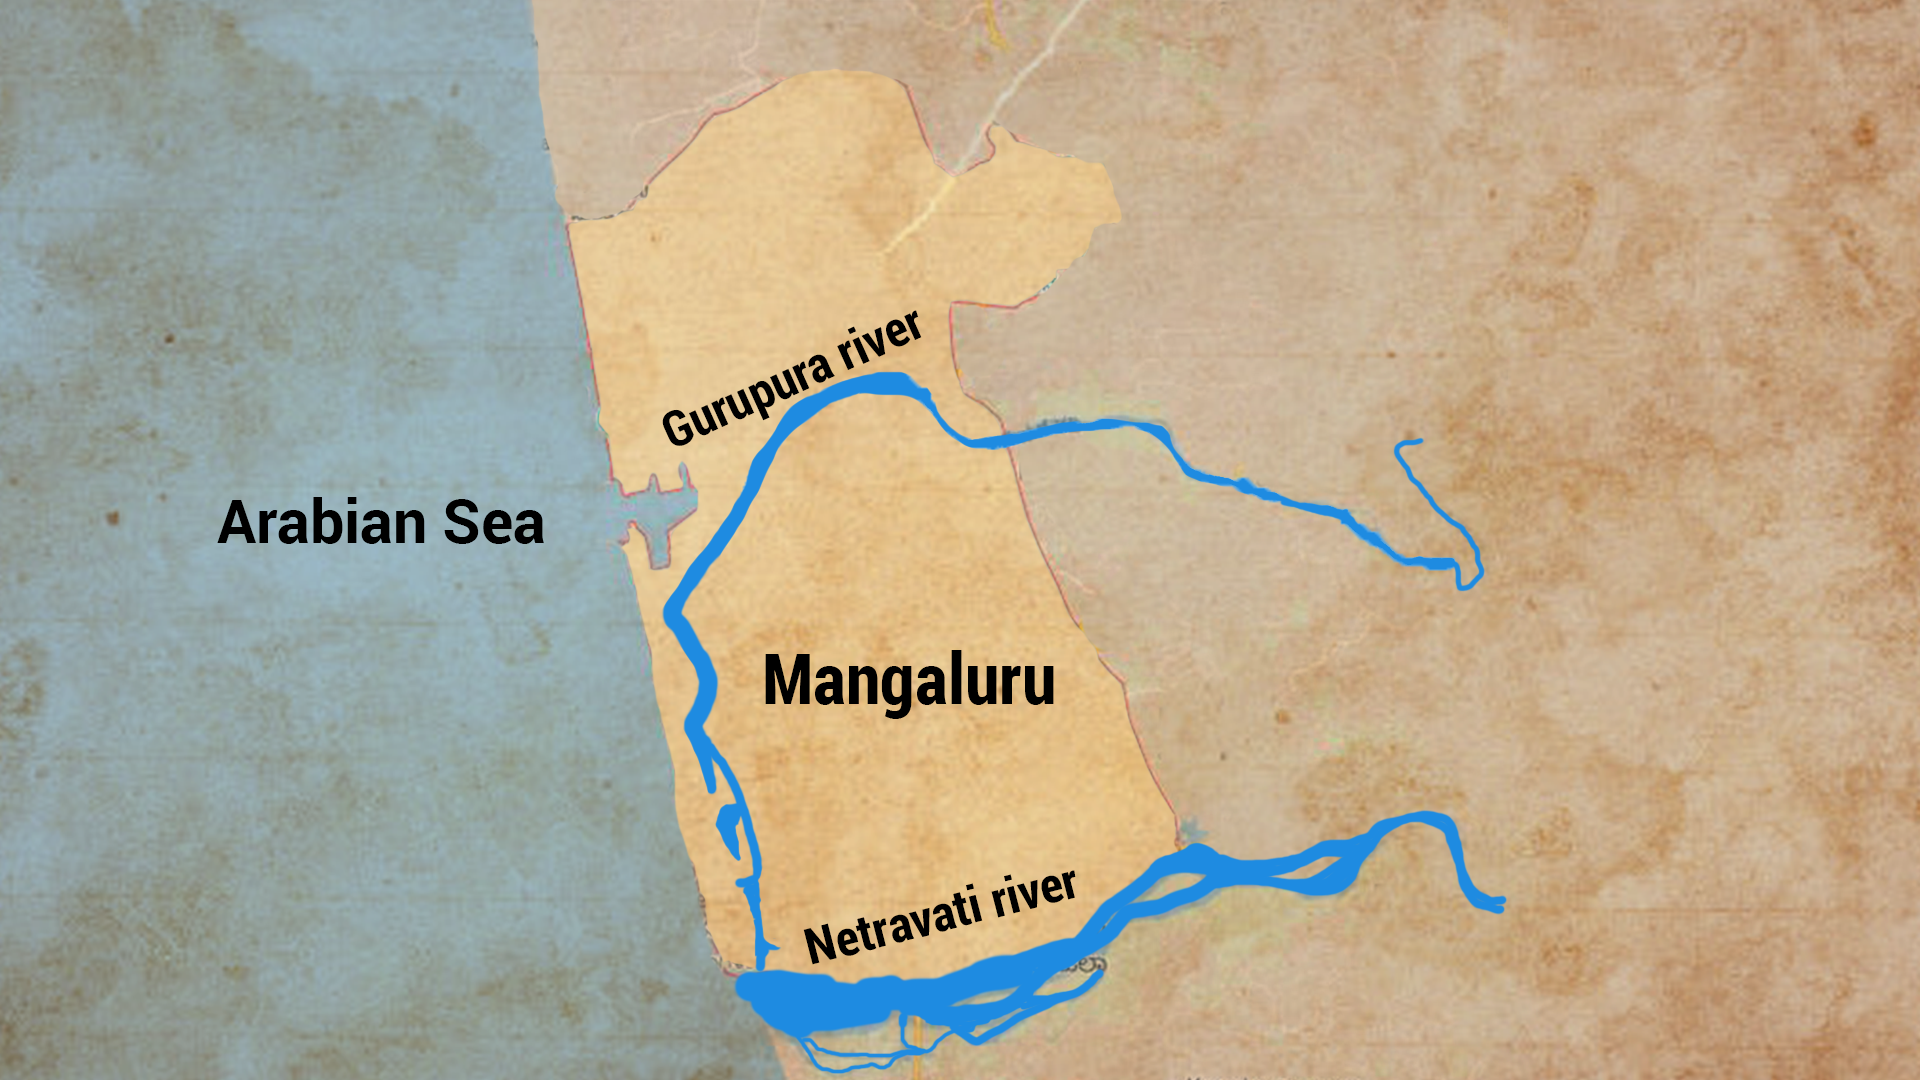 Outline of Mangaluru with the rivers